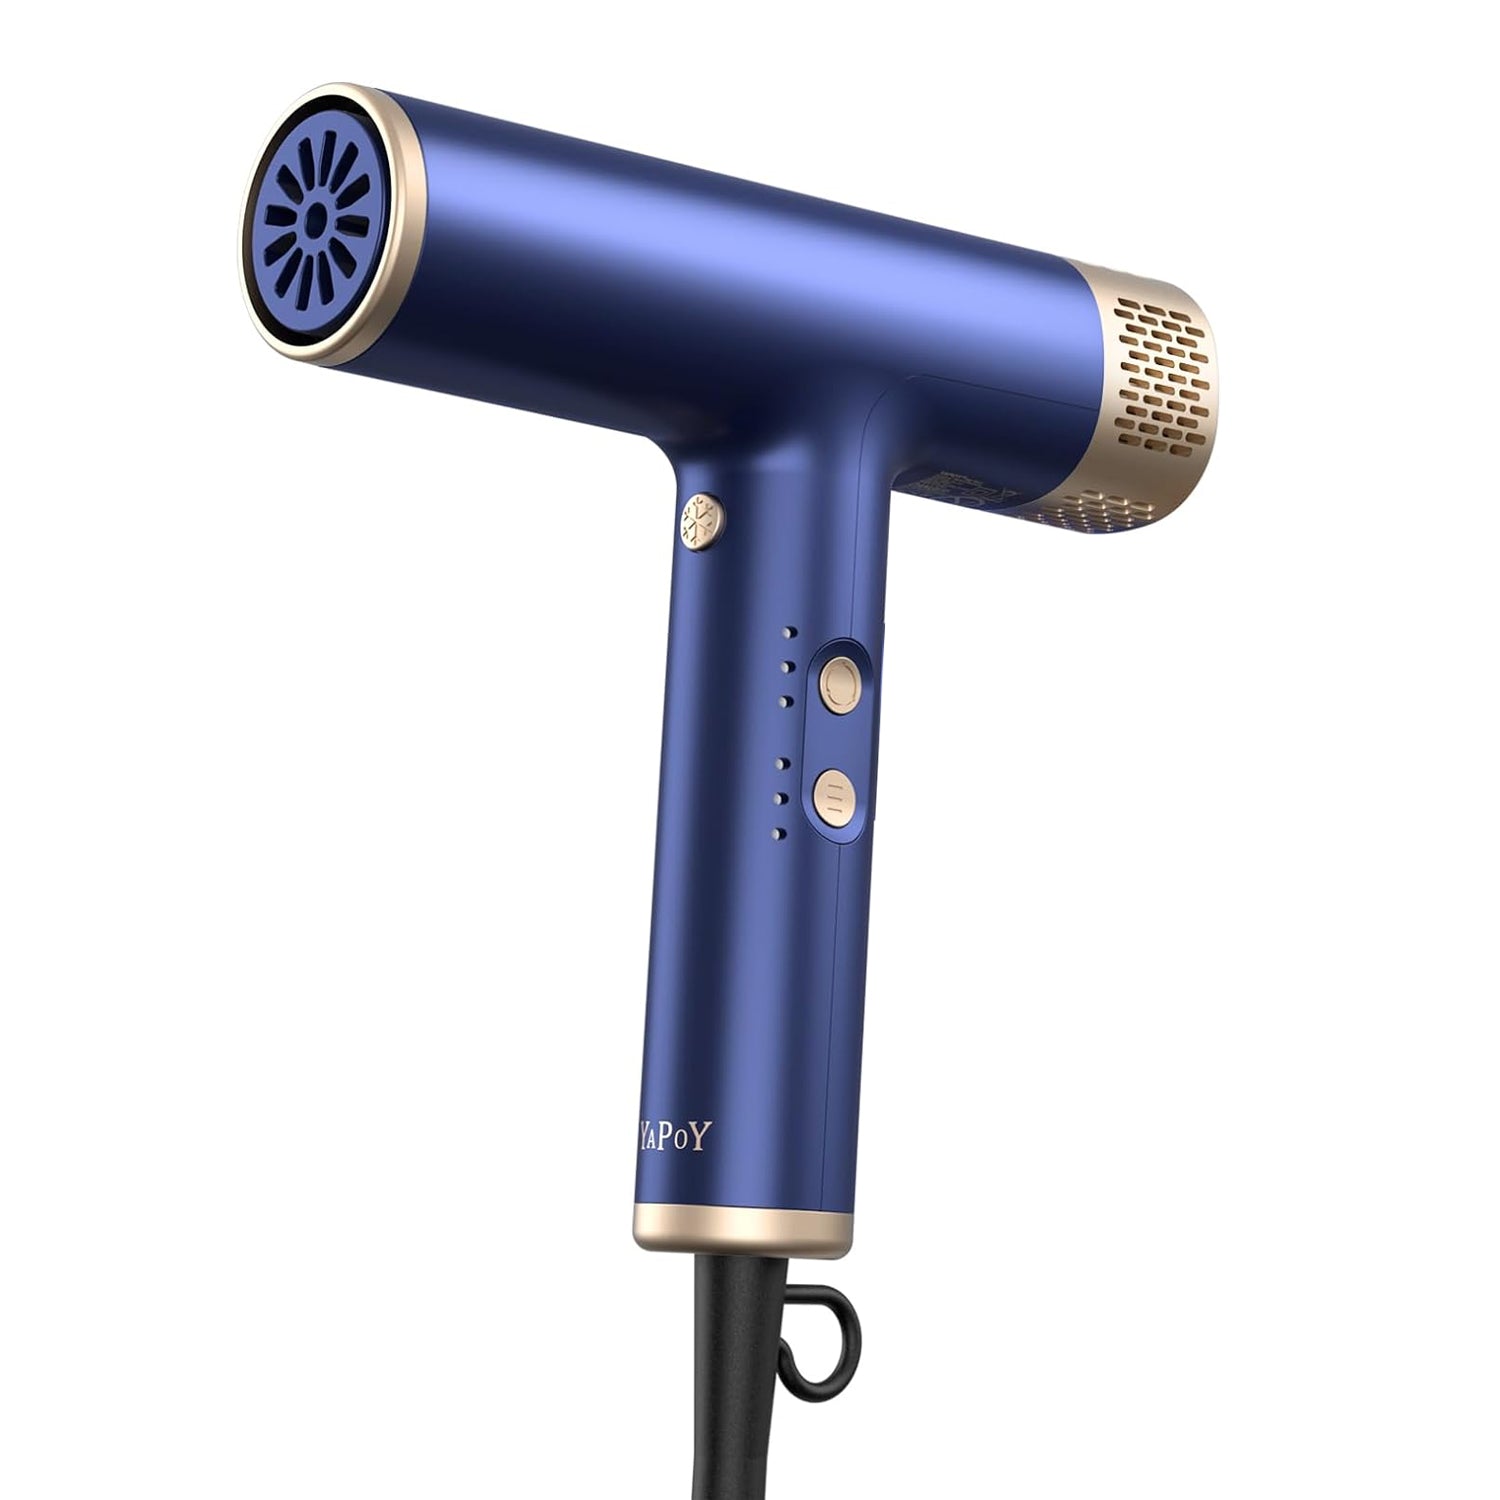 YAPOY High Speed Hair Dryer for a salon-quality experience at home0